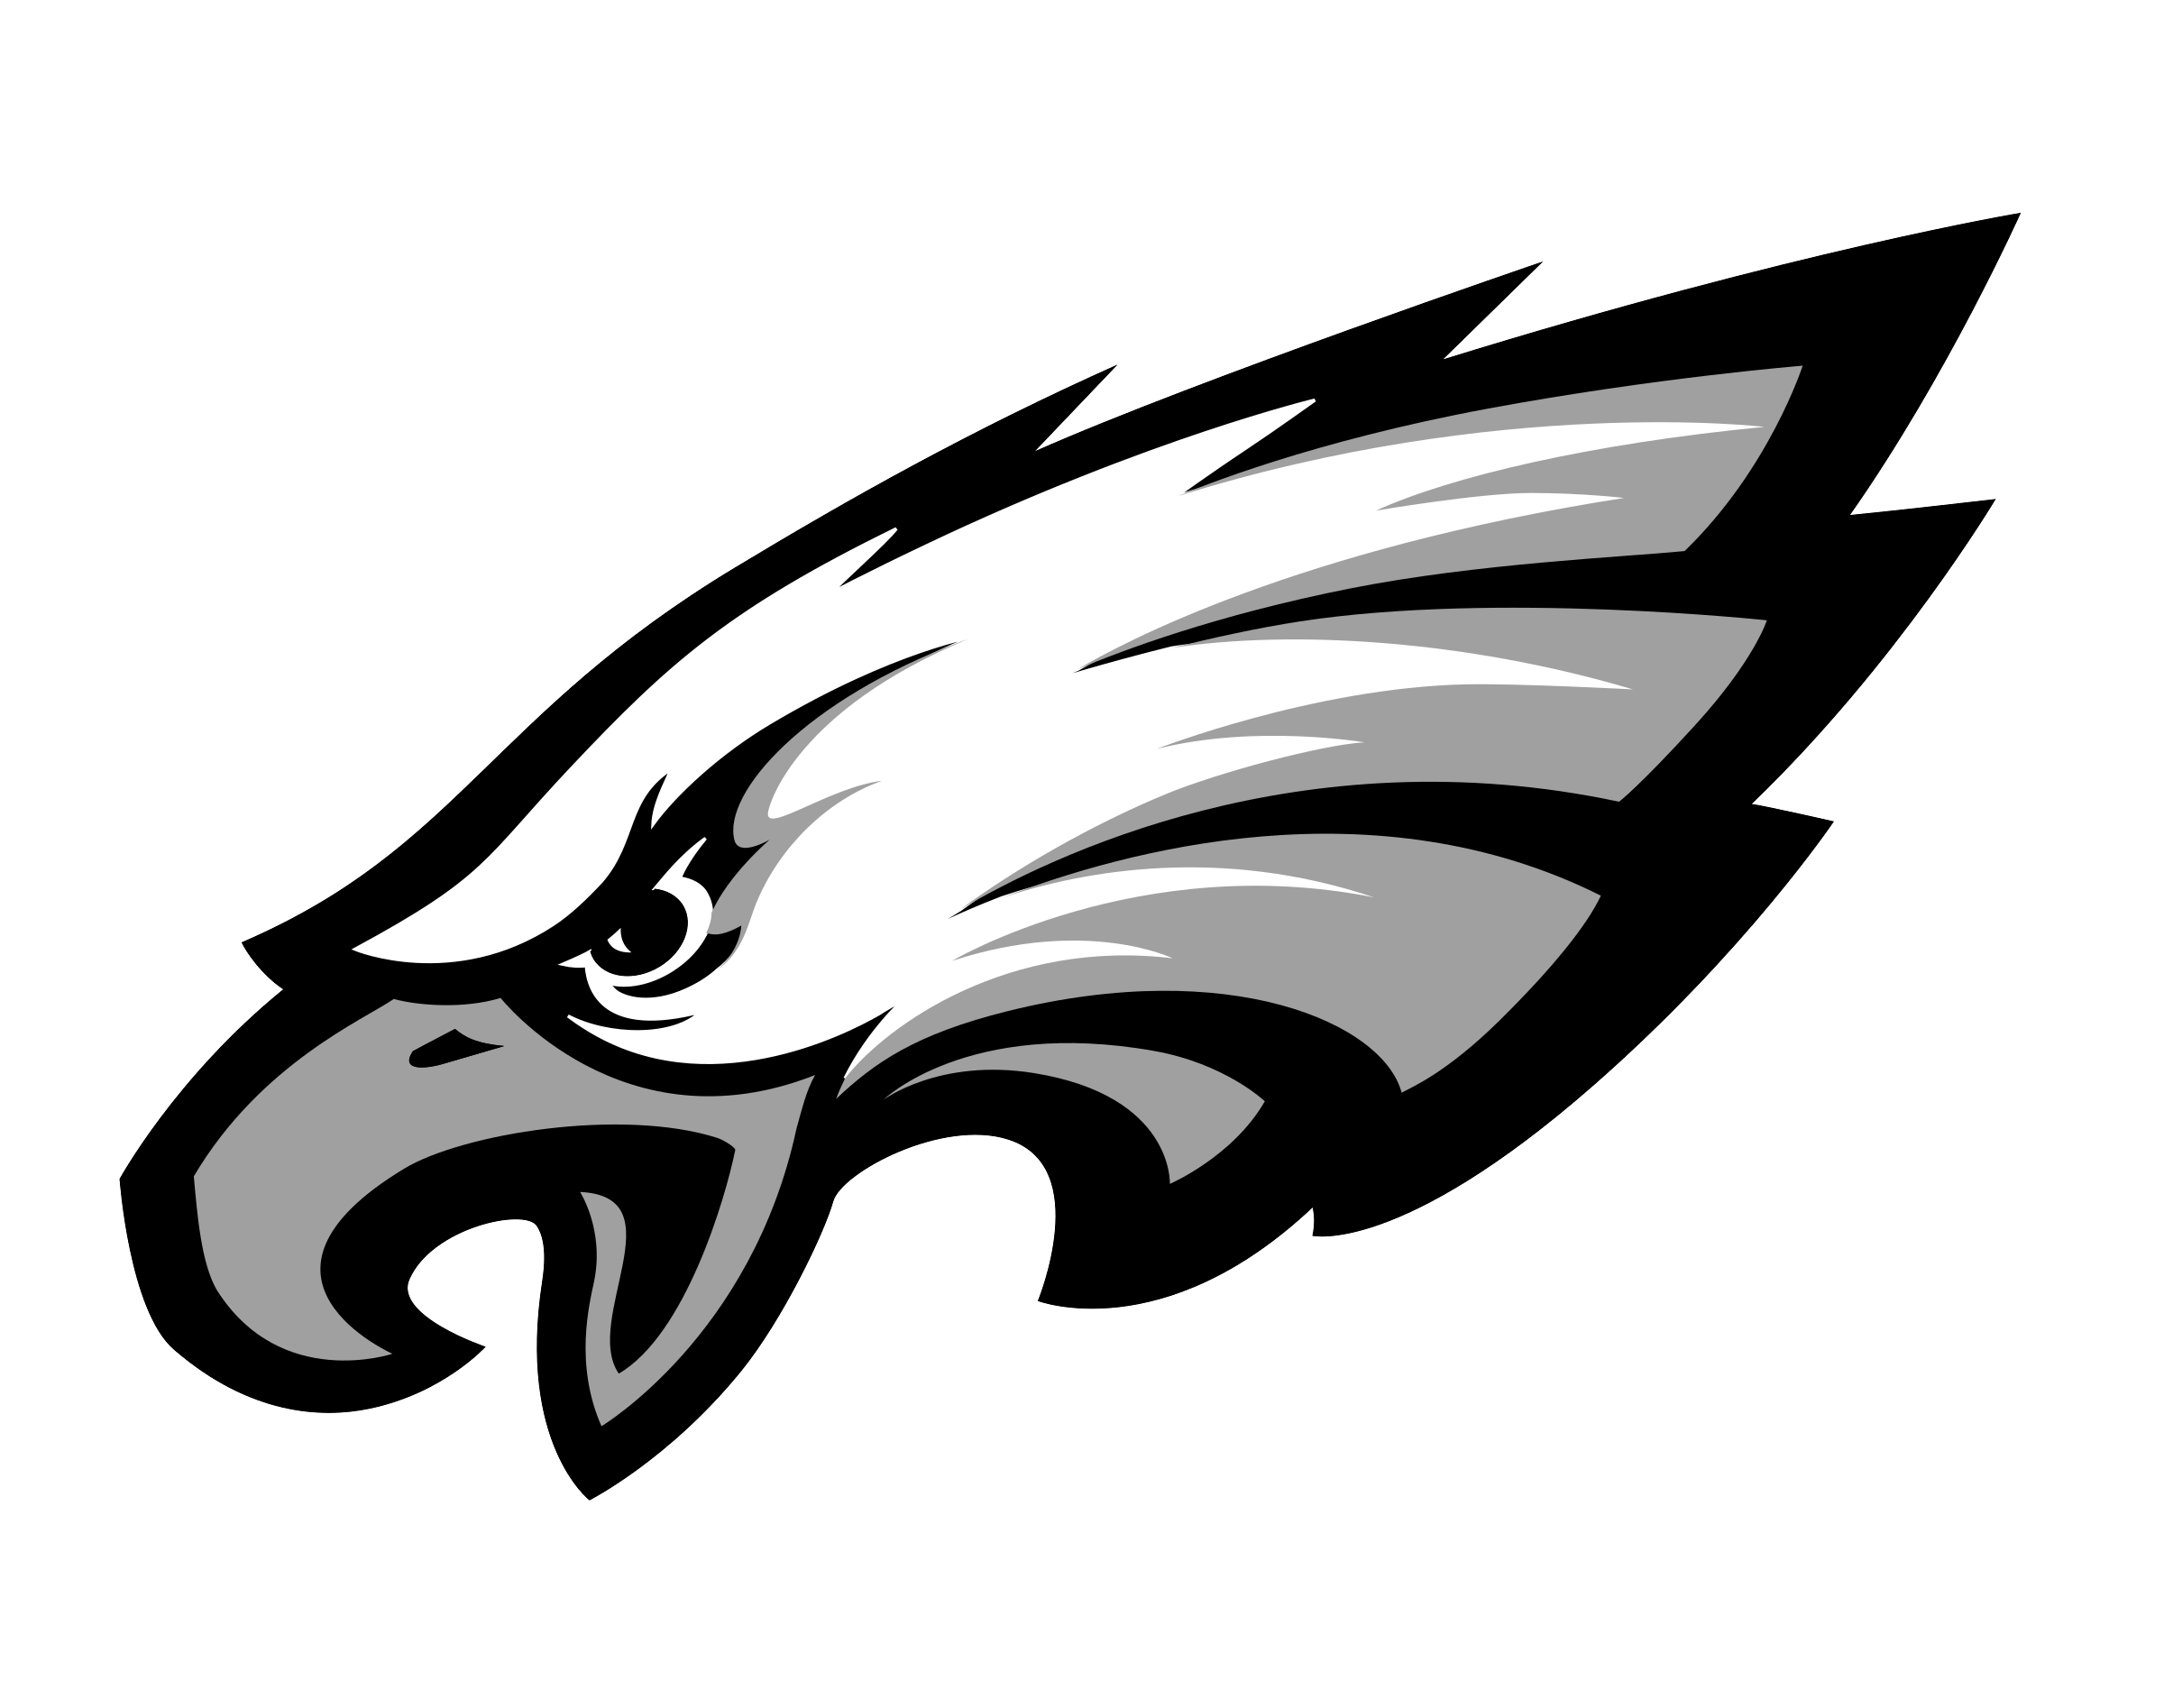 It's Philly Thing Svg, Philadelphia Eagles Svg, Eagles Football Svg